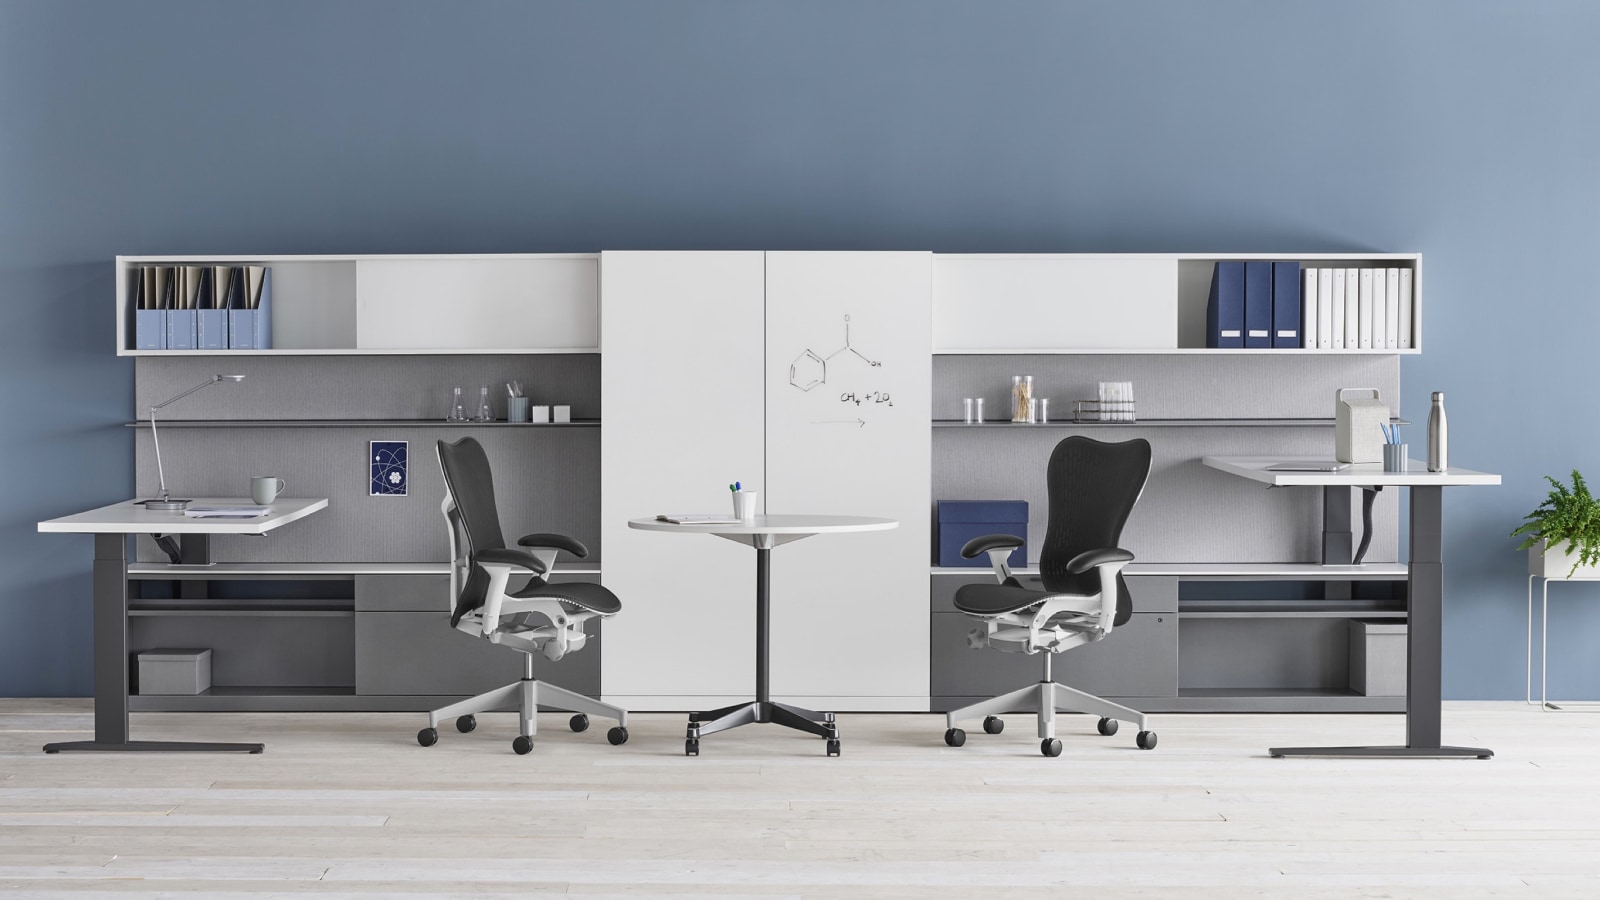 A shared Canvas Private Office with white and gray storage, one standing desk at seated height and one standing desk at standing height, and dark gray Mirra 2 office chairs. Select to go to the Impromptu Meeting Spaces page within the Canvas Lookbook.